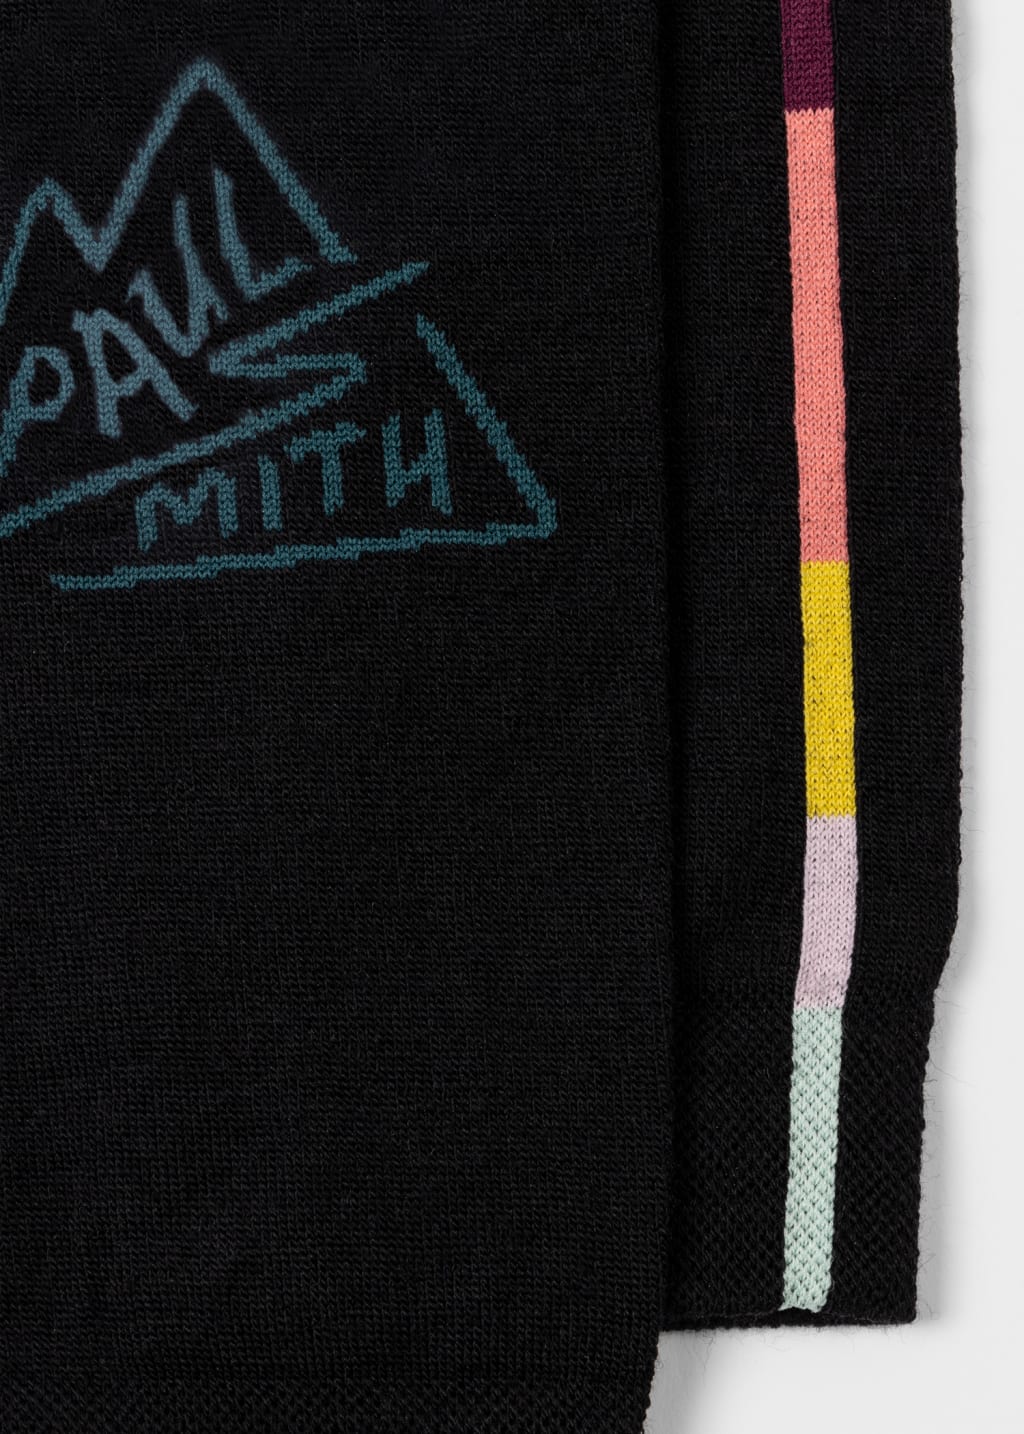 Detail View - Black Wool-Blend Cycling Arm Warmers Paul Smith